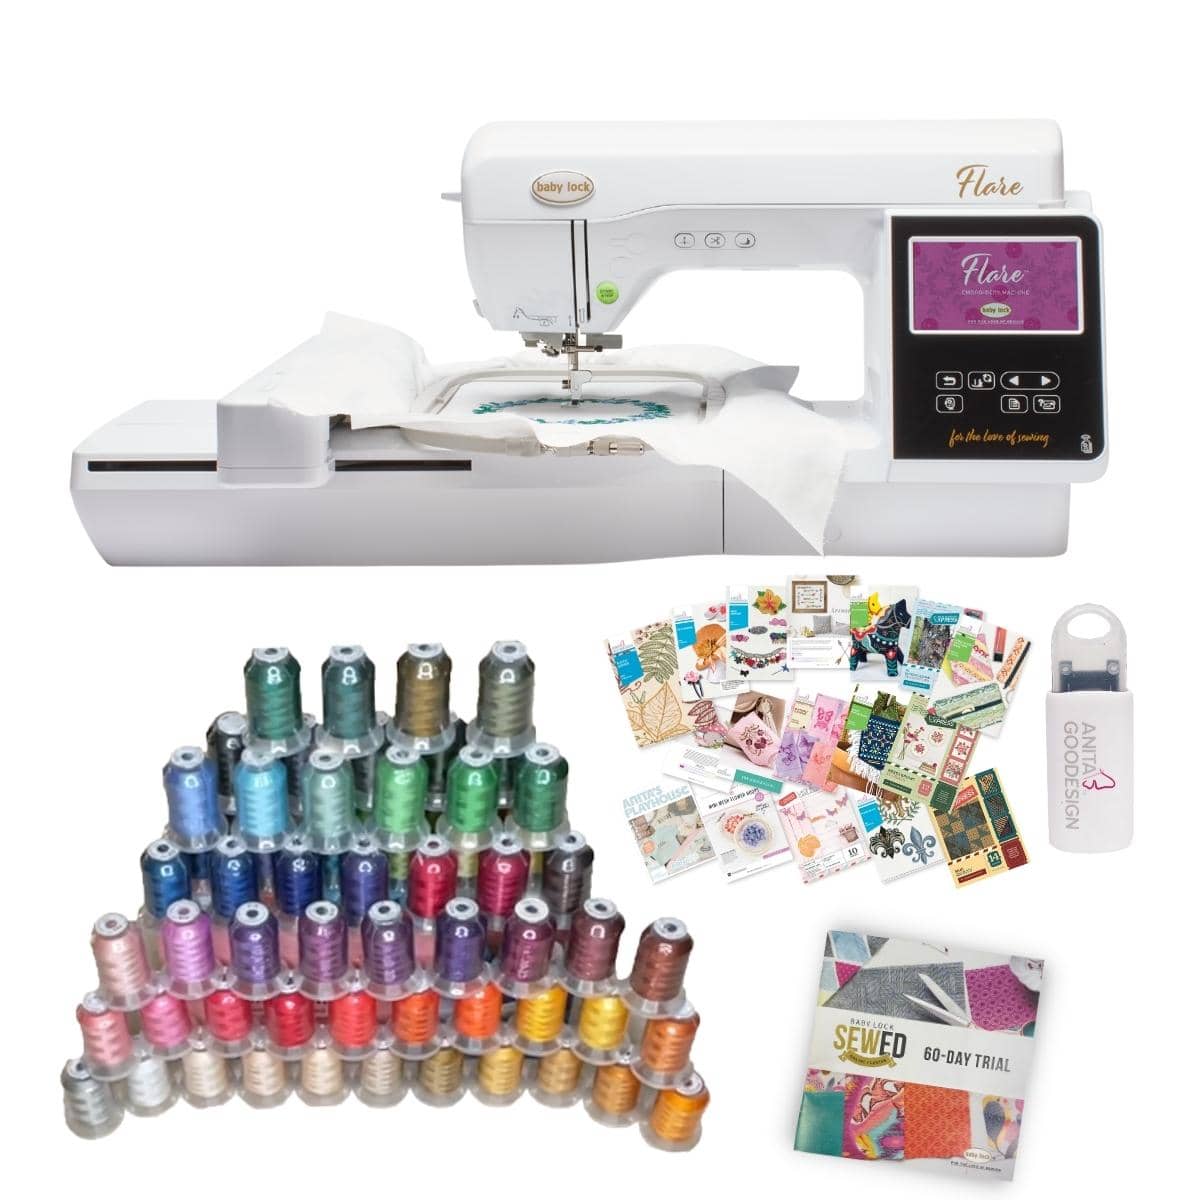 Free Pattern Alert! Make our Serger & Sewing Machine Cover